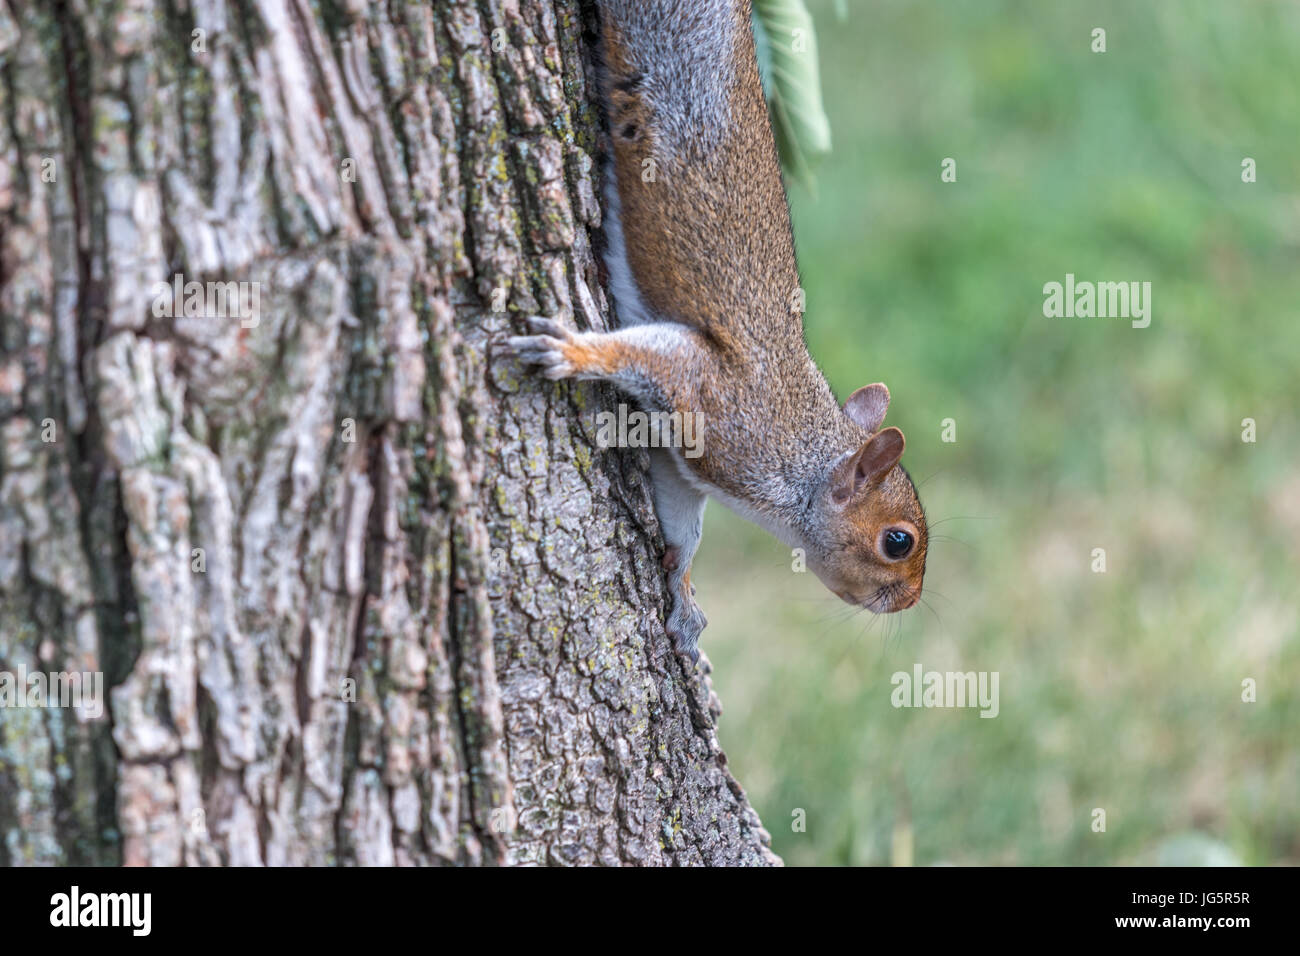 Squirrels Holding to Tree Upside down Stock Photo